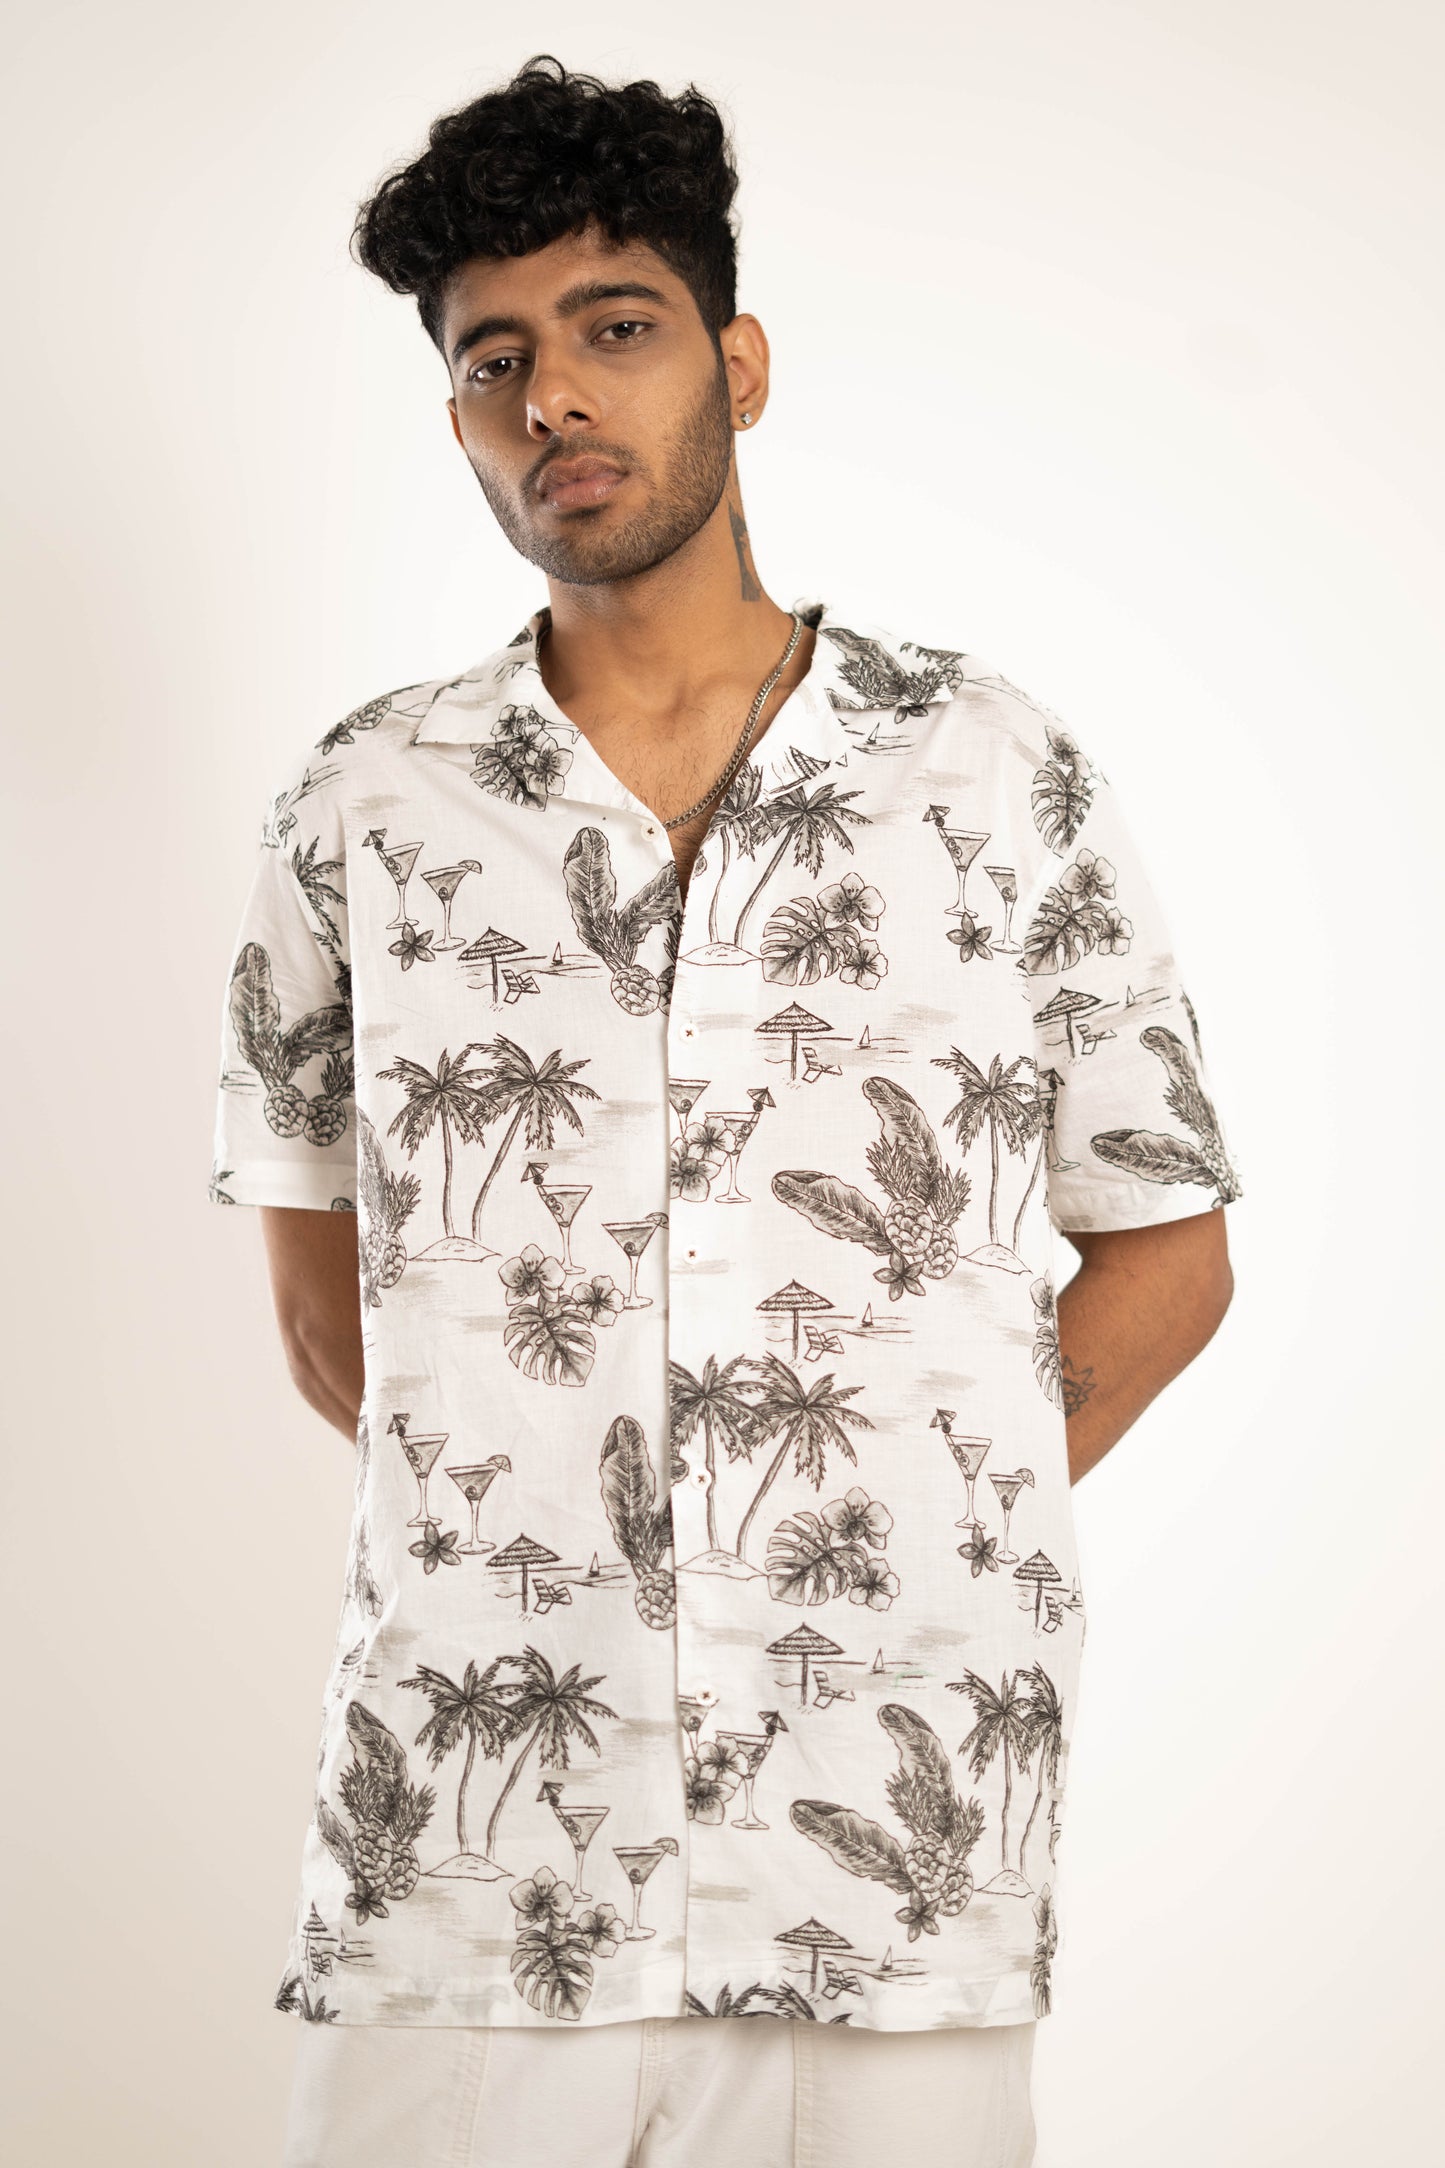 Men's Relaxed Fit Short Sleeves Sea Shore Side Printed White Shirt